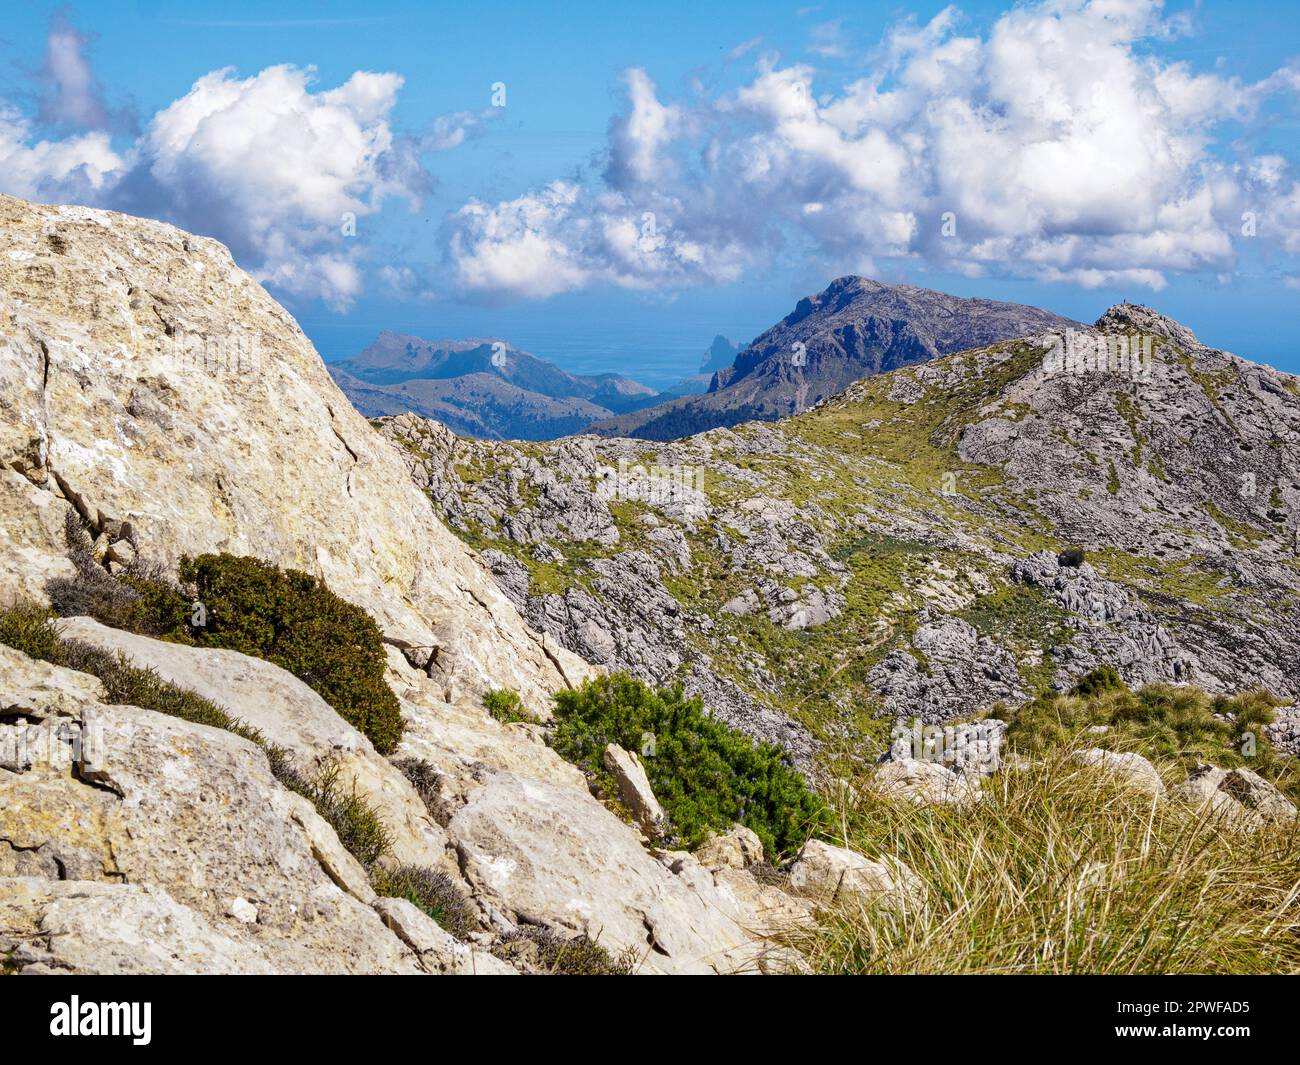 View from the Coll des Prat on the GR221 Drystone Route through the Tramuntana Mountains looking towards the Formentor peninsula Stock Photo